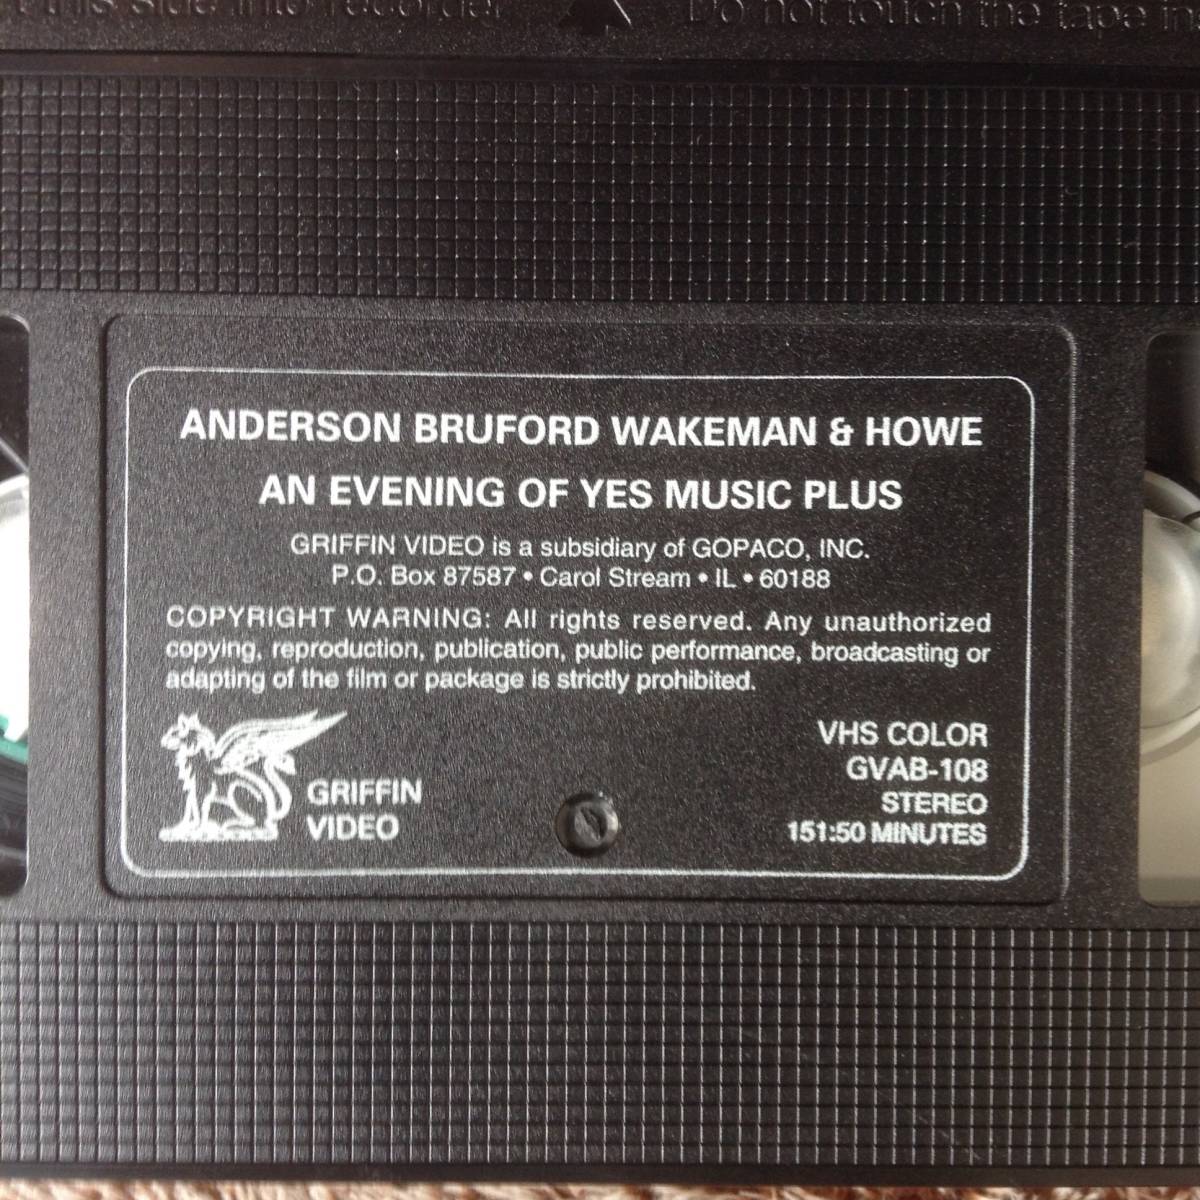 VHS VIDEO ANDERSON BRUFORD WAKEMAN & HOW AN EVENING OF YES MUSIC PLUS